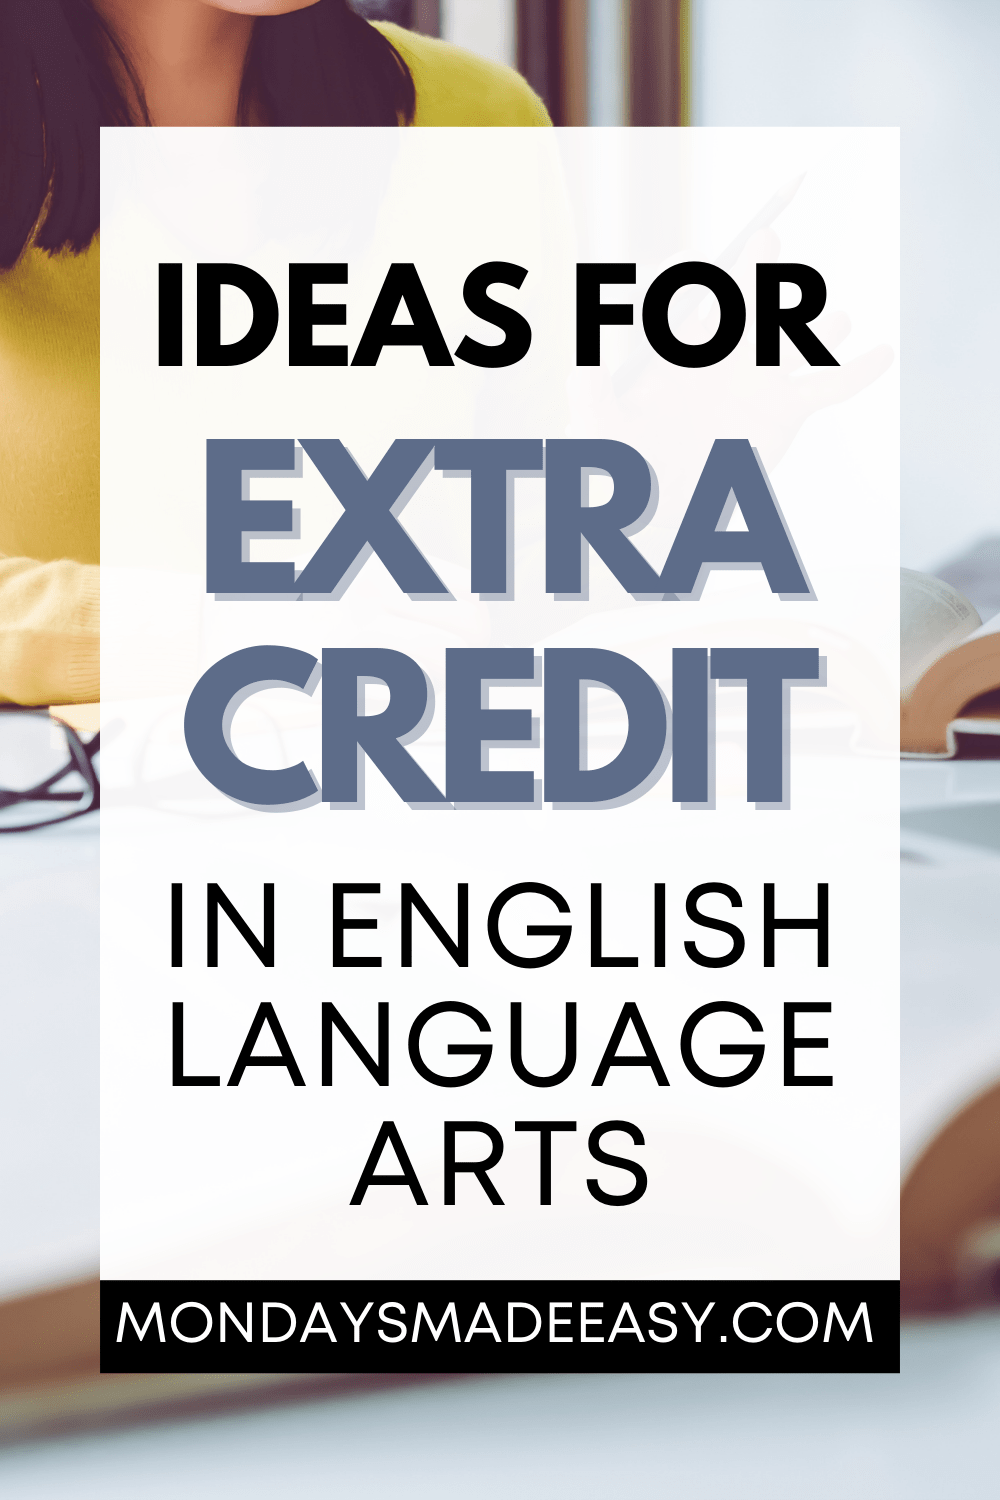 extra credit assignments ideas